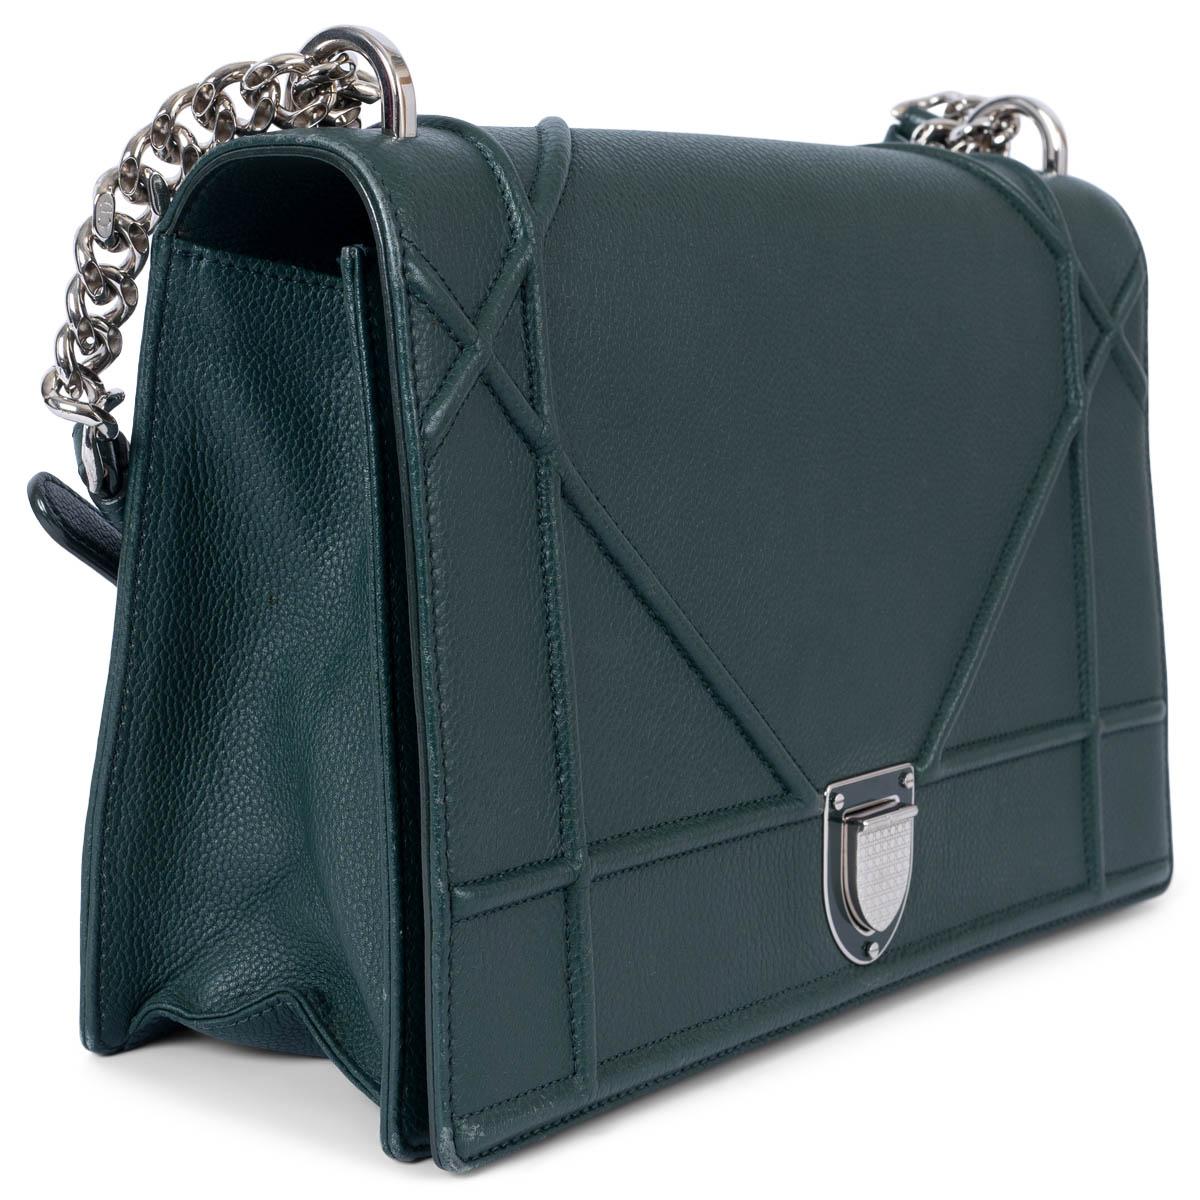 100% authentic Christian Dior Large Diorama shoulder bag in grained bottle green calfskin. The design is covered in the brand's signature Cannage pattern and opens with a push-lock closure on the flap. Lined in navy blue grosgrain fabric with one